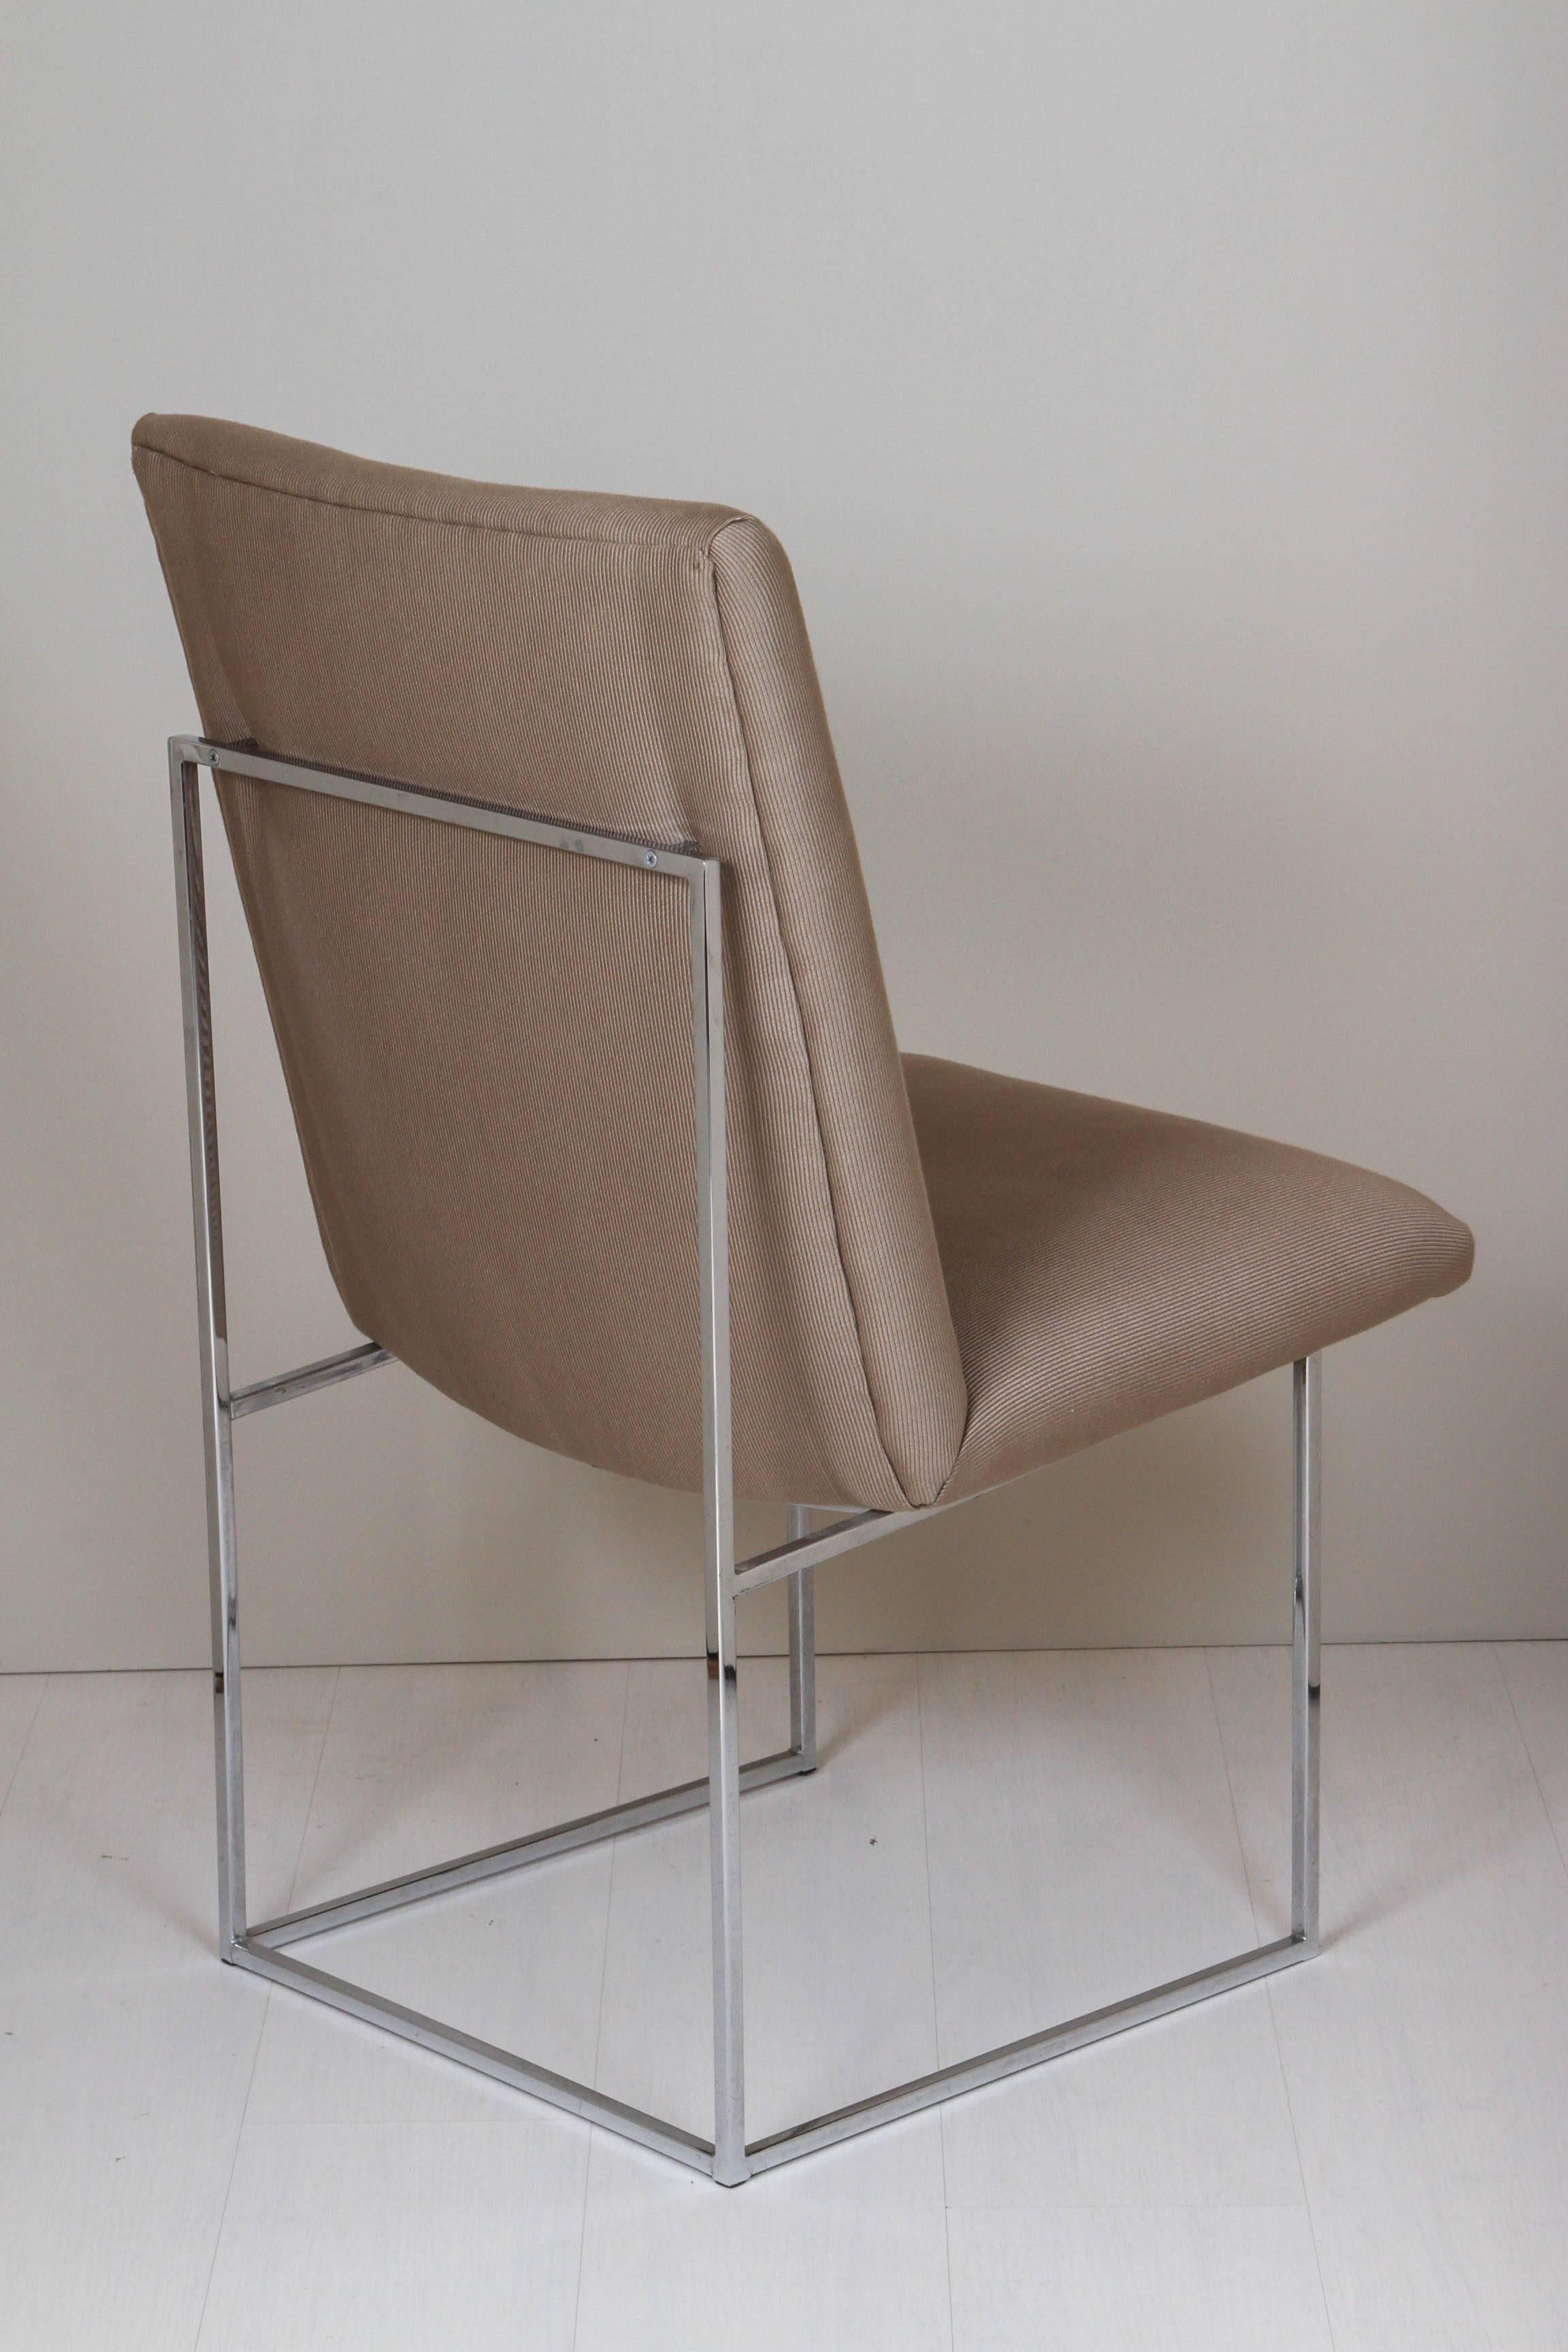 Pair of Milo Baughman Chairs In Excellent Condition For Sale In Santa Monica, CA